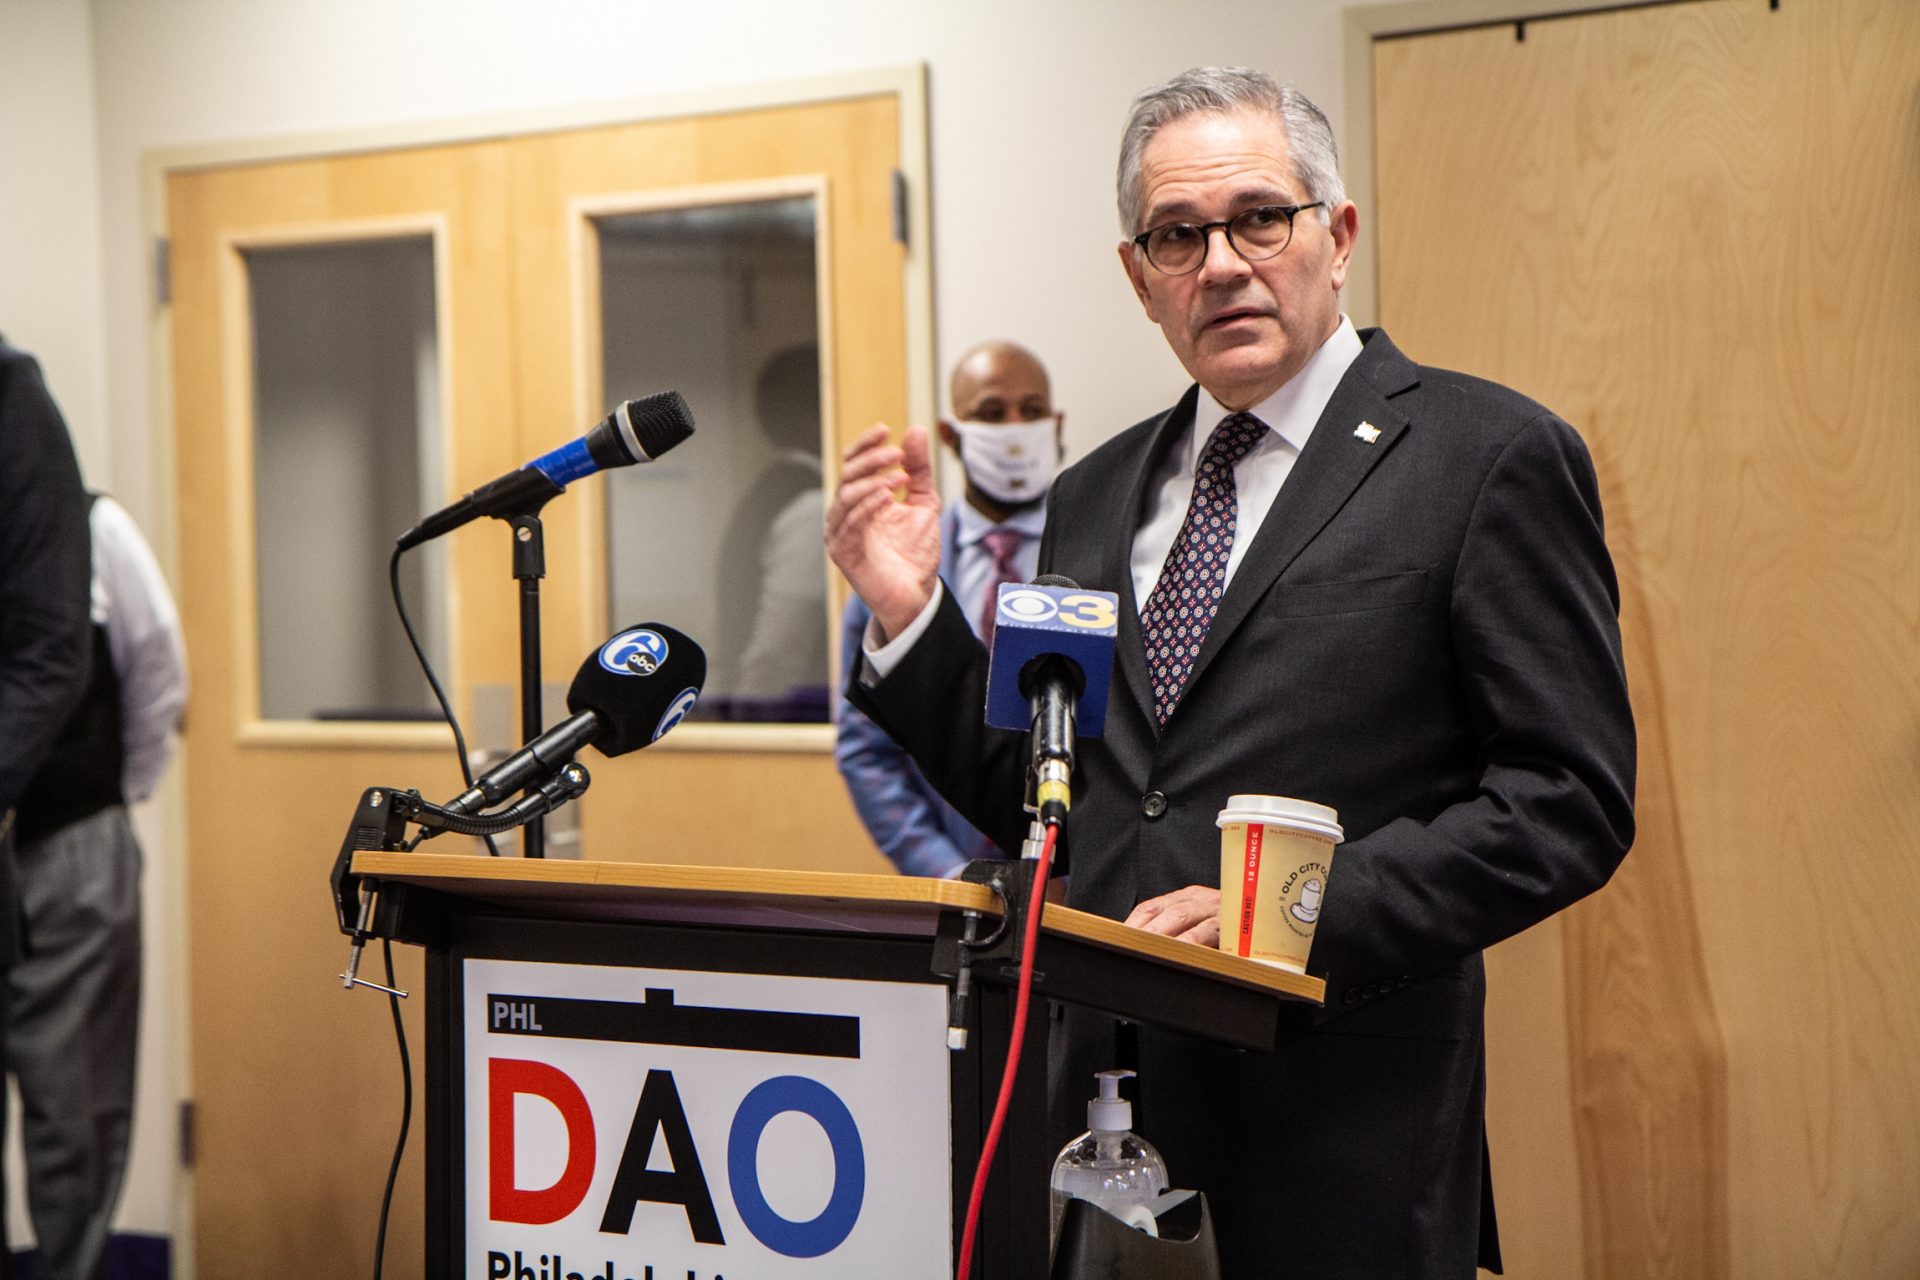 Philadelphia District Attorney Larry Krasner announced the formation of a new Anti-Discrimination Advisory Board.